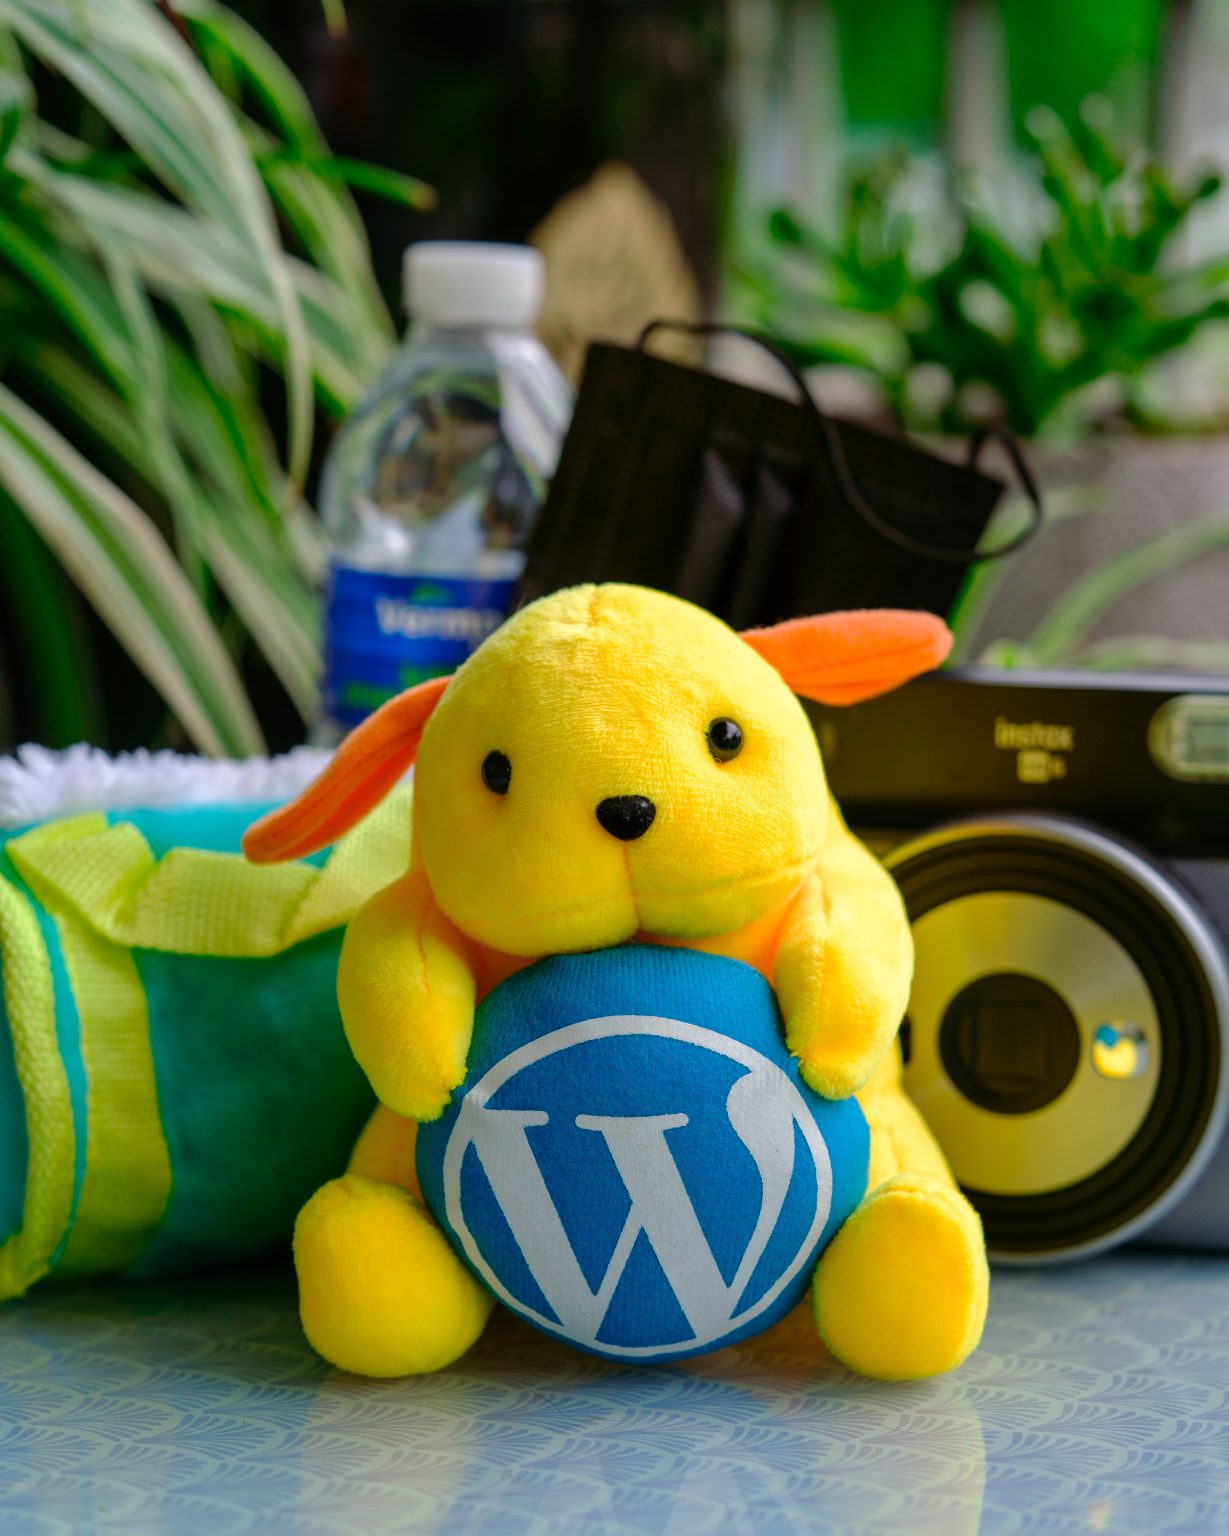 Yellow Wapuu plush toy with blue WordPress logo on a background with a camera, a green and blue bag, and black face mask, a bottle of water, and plants.